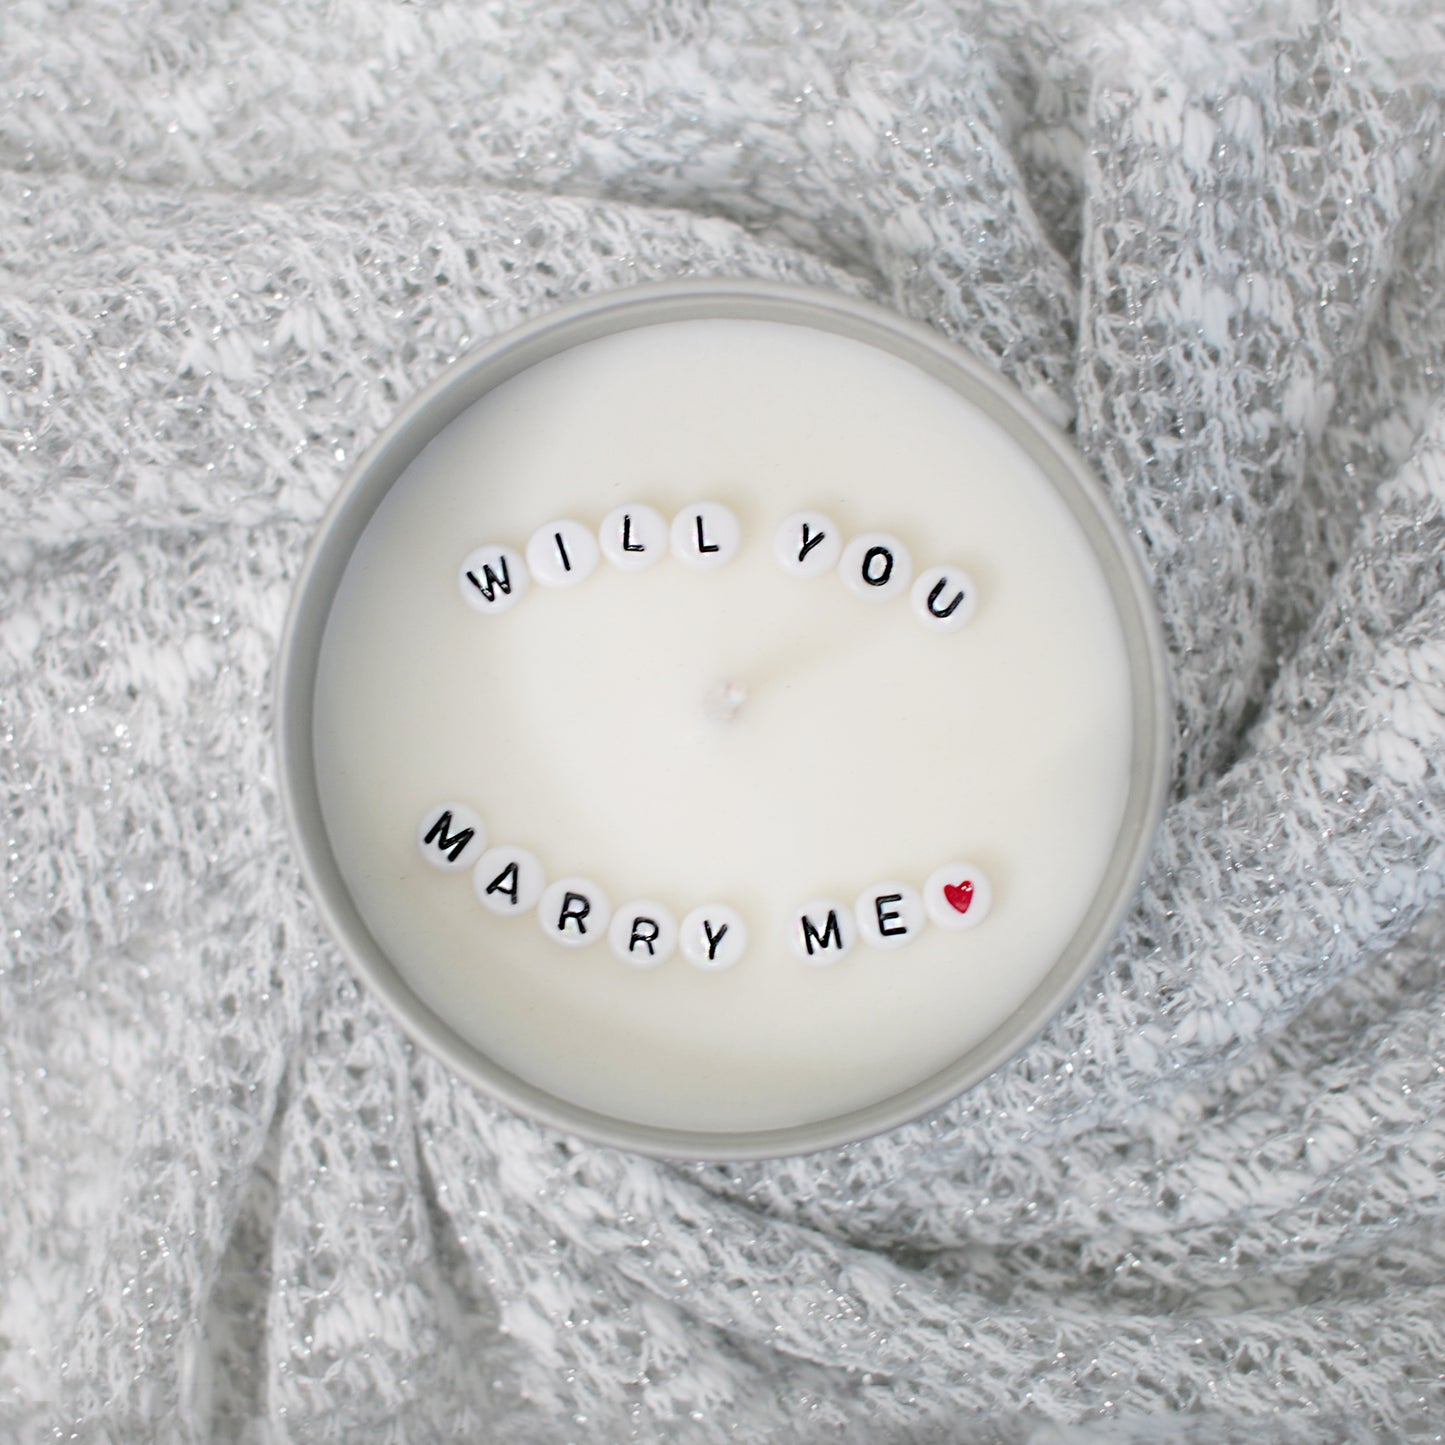 WILL YOU MARRY ME CANDLE